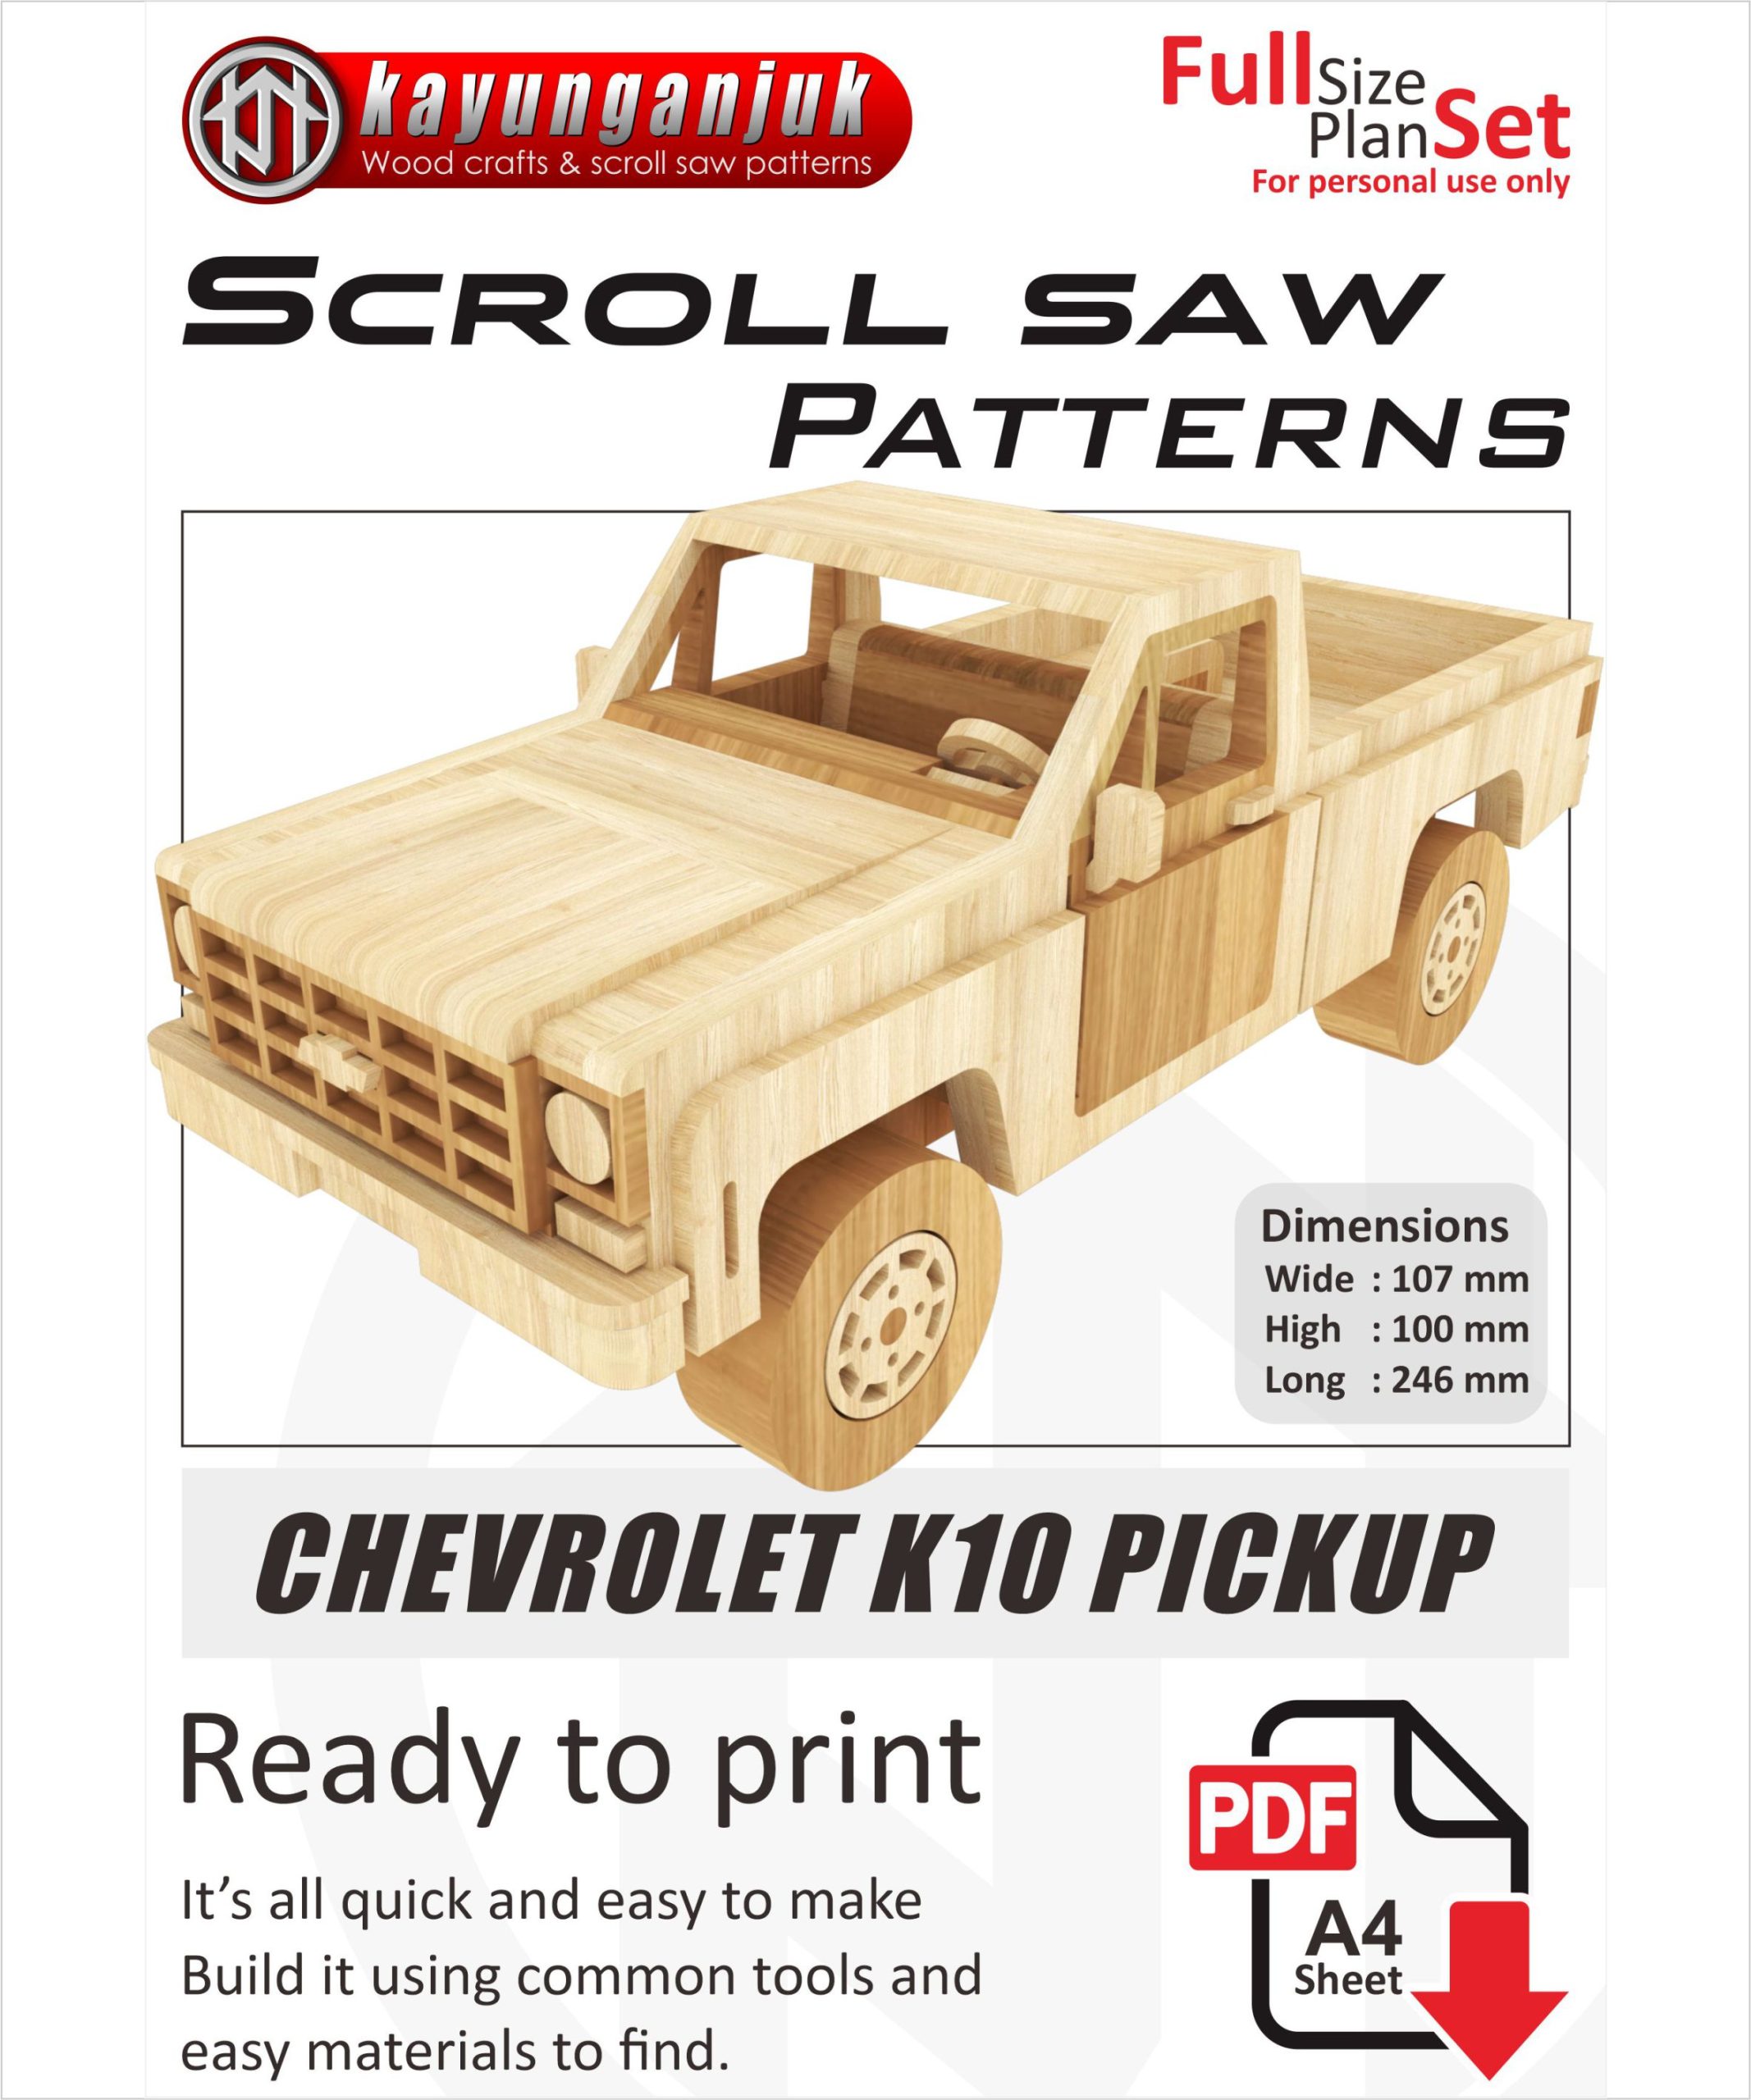 Chevrolet Pickup Truck Wooden Toy Plans